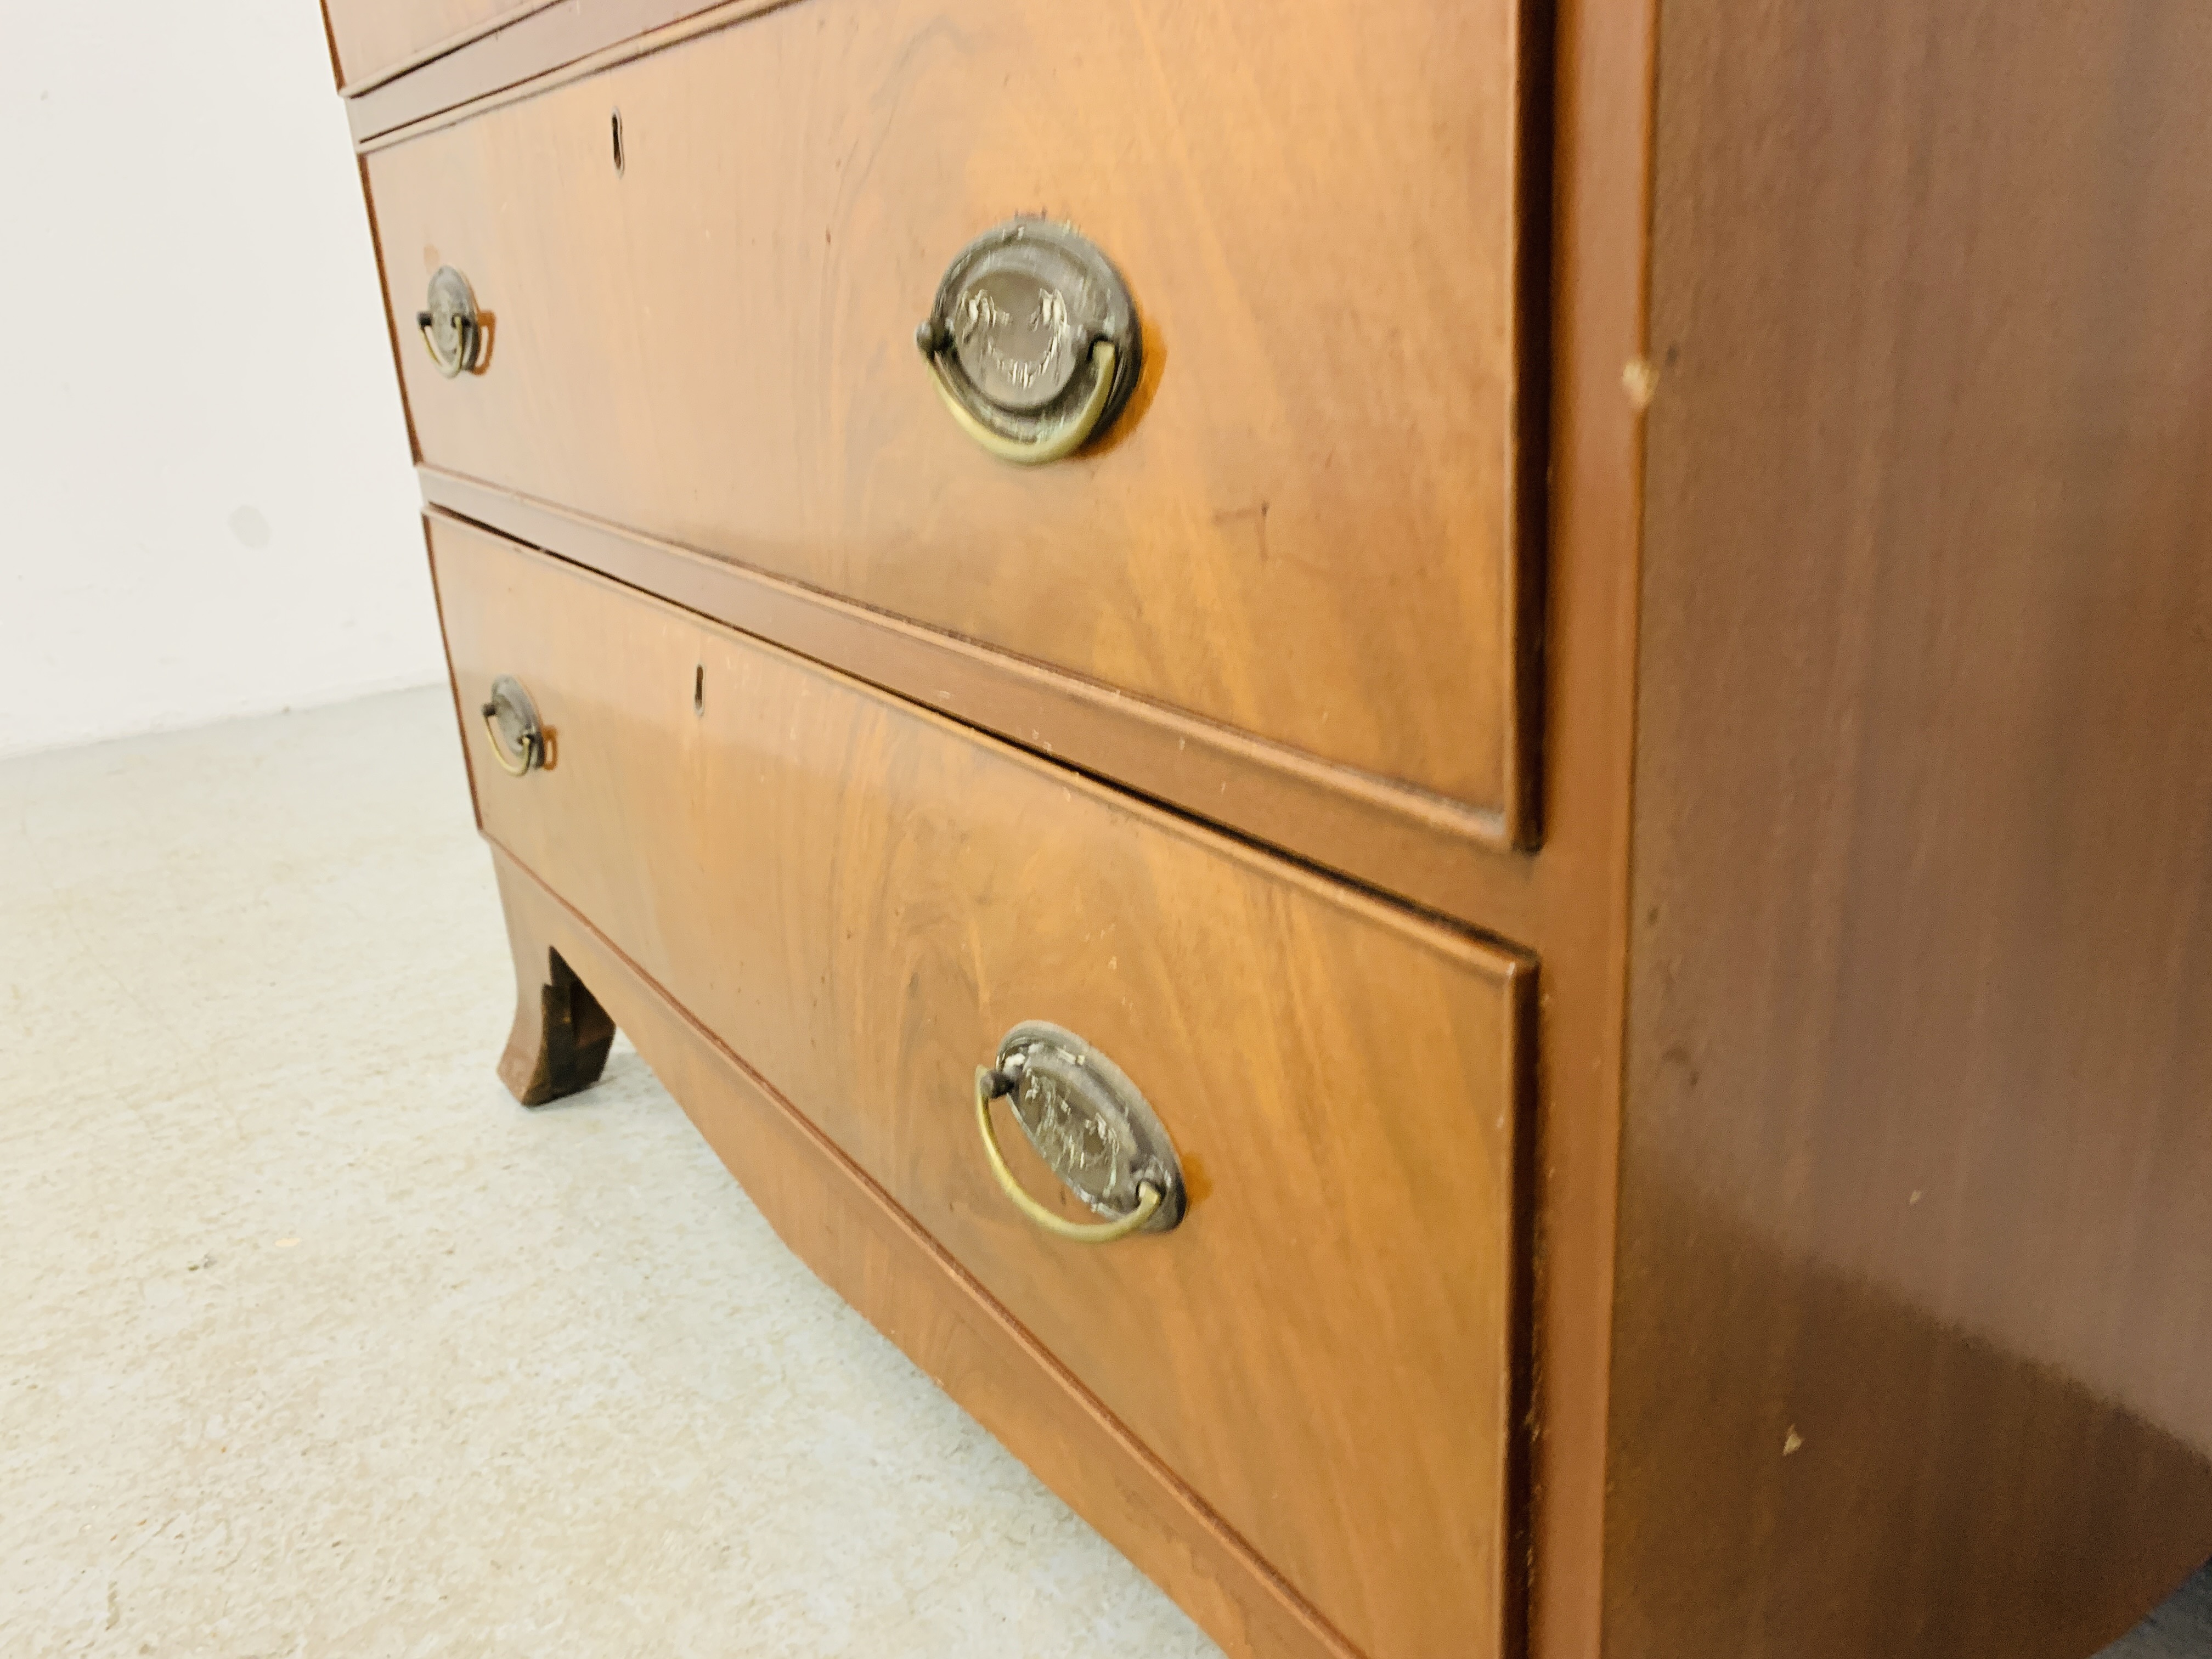 AN EARLY C19TH EDWARDIAN TWO OVER TWO DRAWER CHEST WITH BRASS HANDLES - W 91CM. D 44CM. H 80CM. - Image 8 of 8